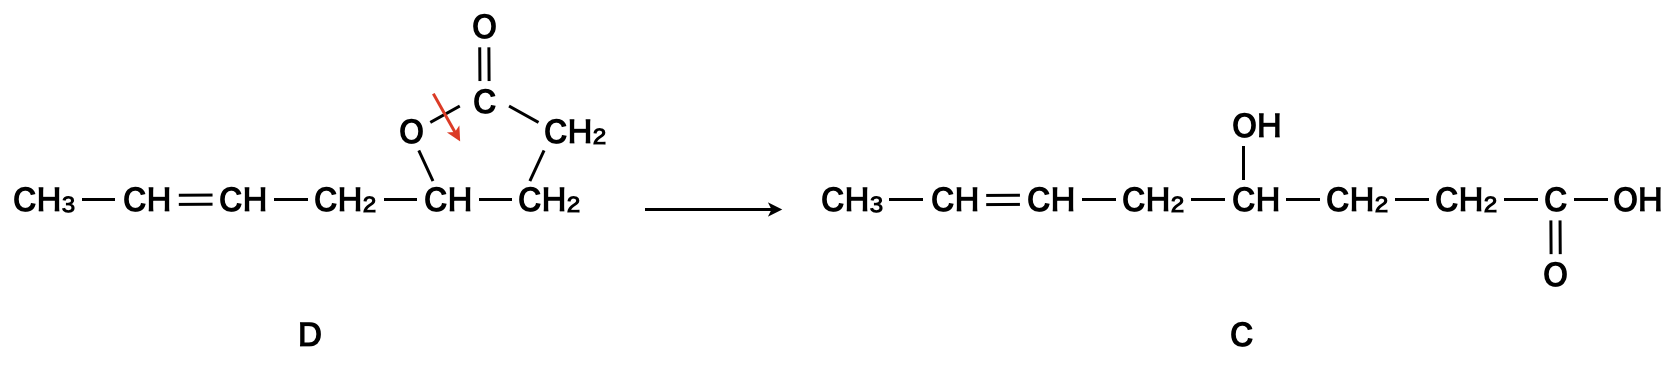 oxidation cleavage reaction